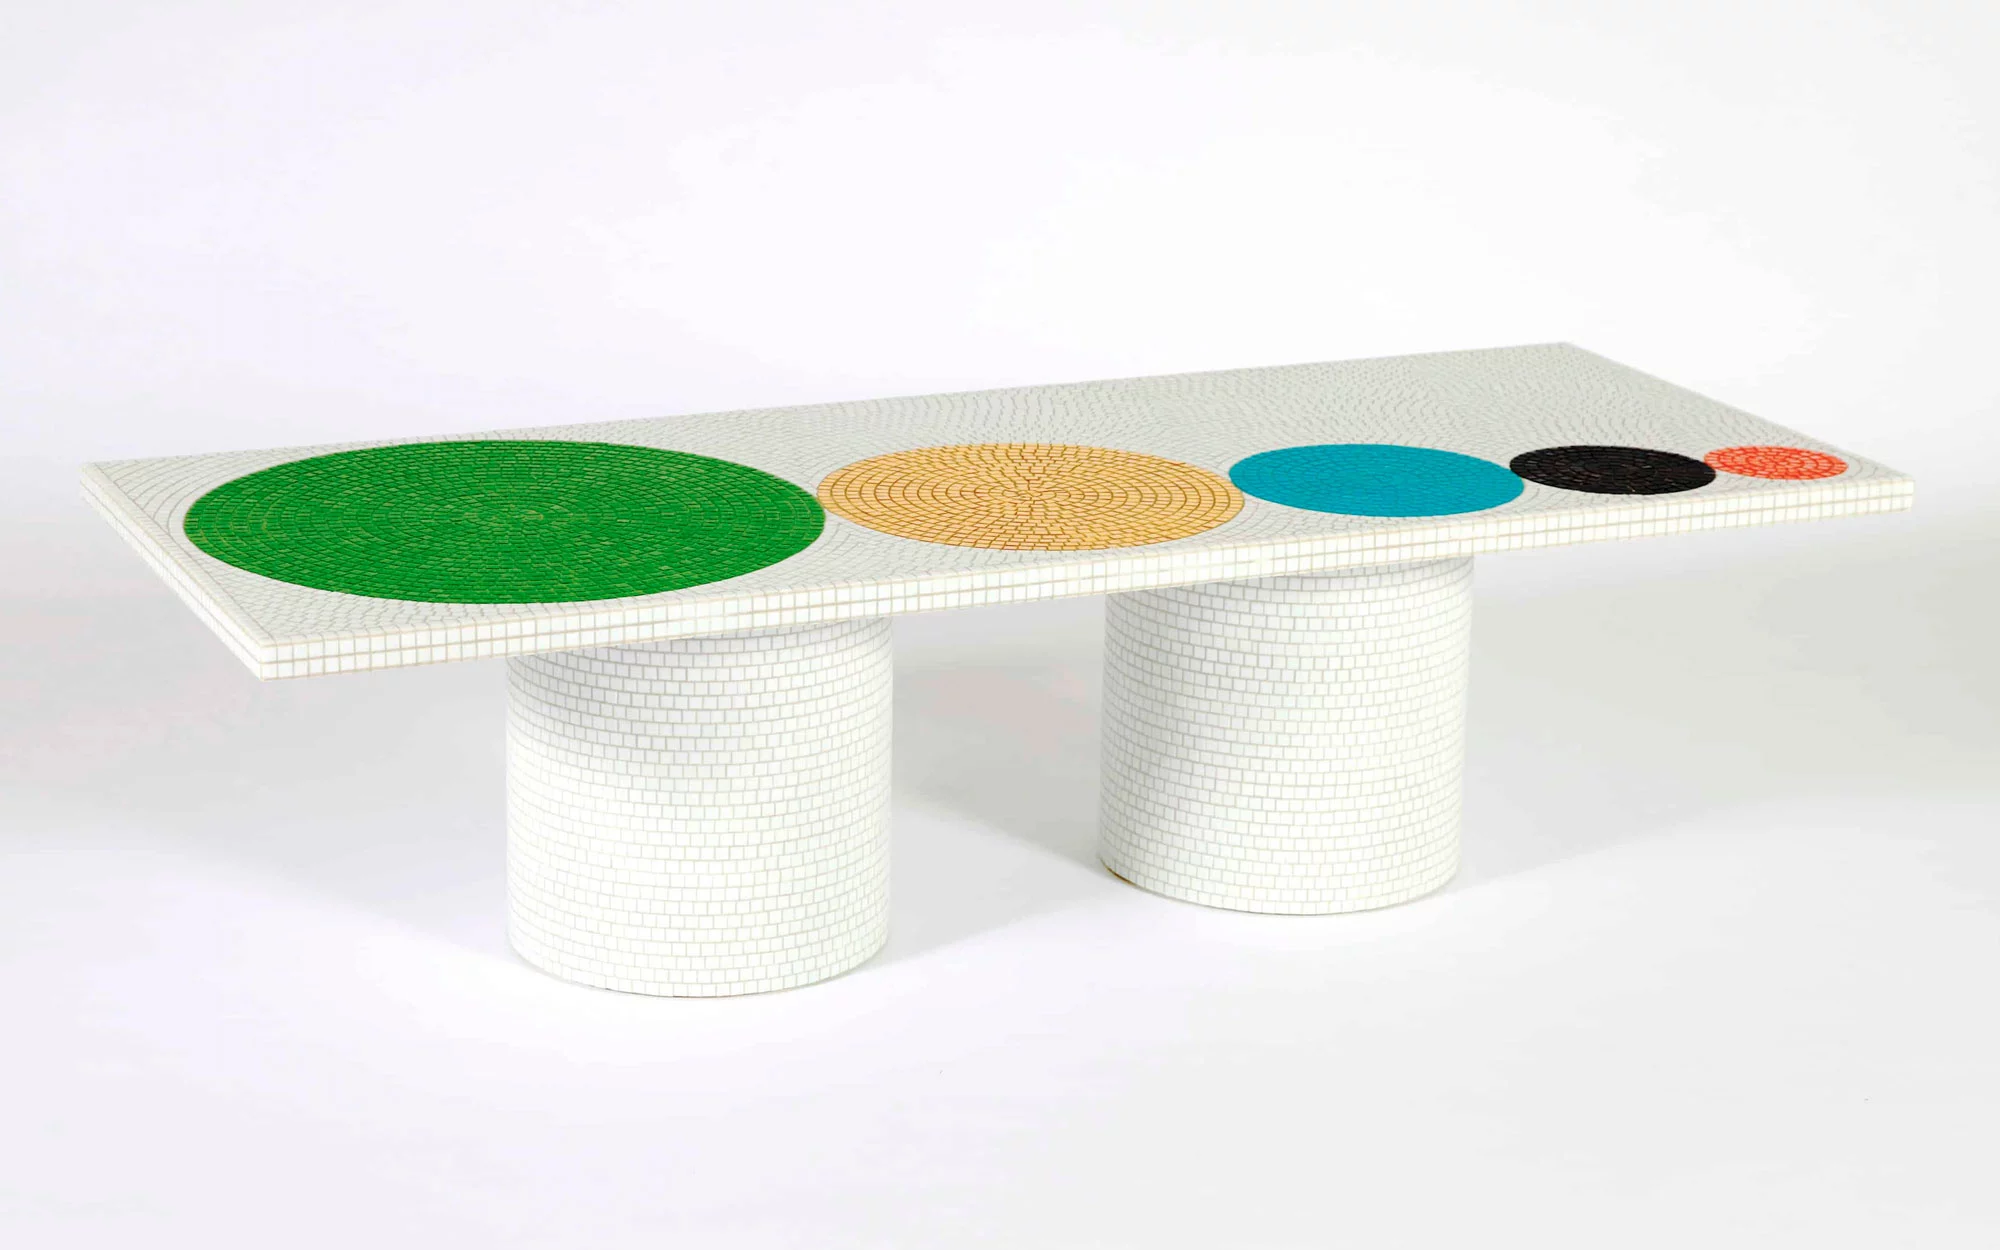 Crescendo White Coffee Table - Pierre Charpin - Art and Drawing - Galerie kreo